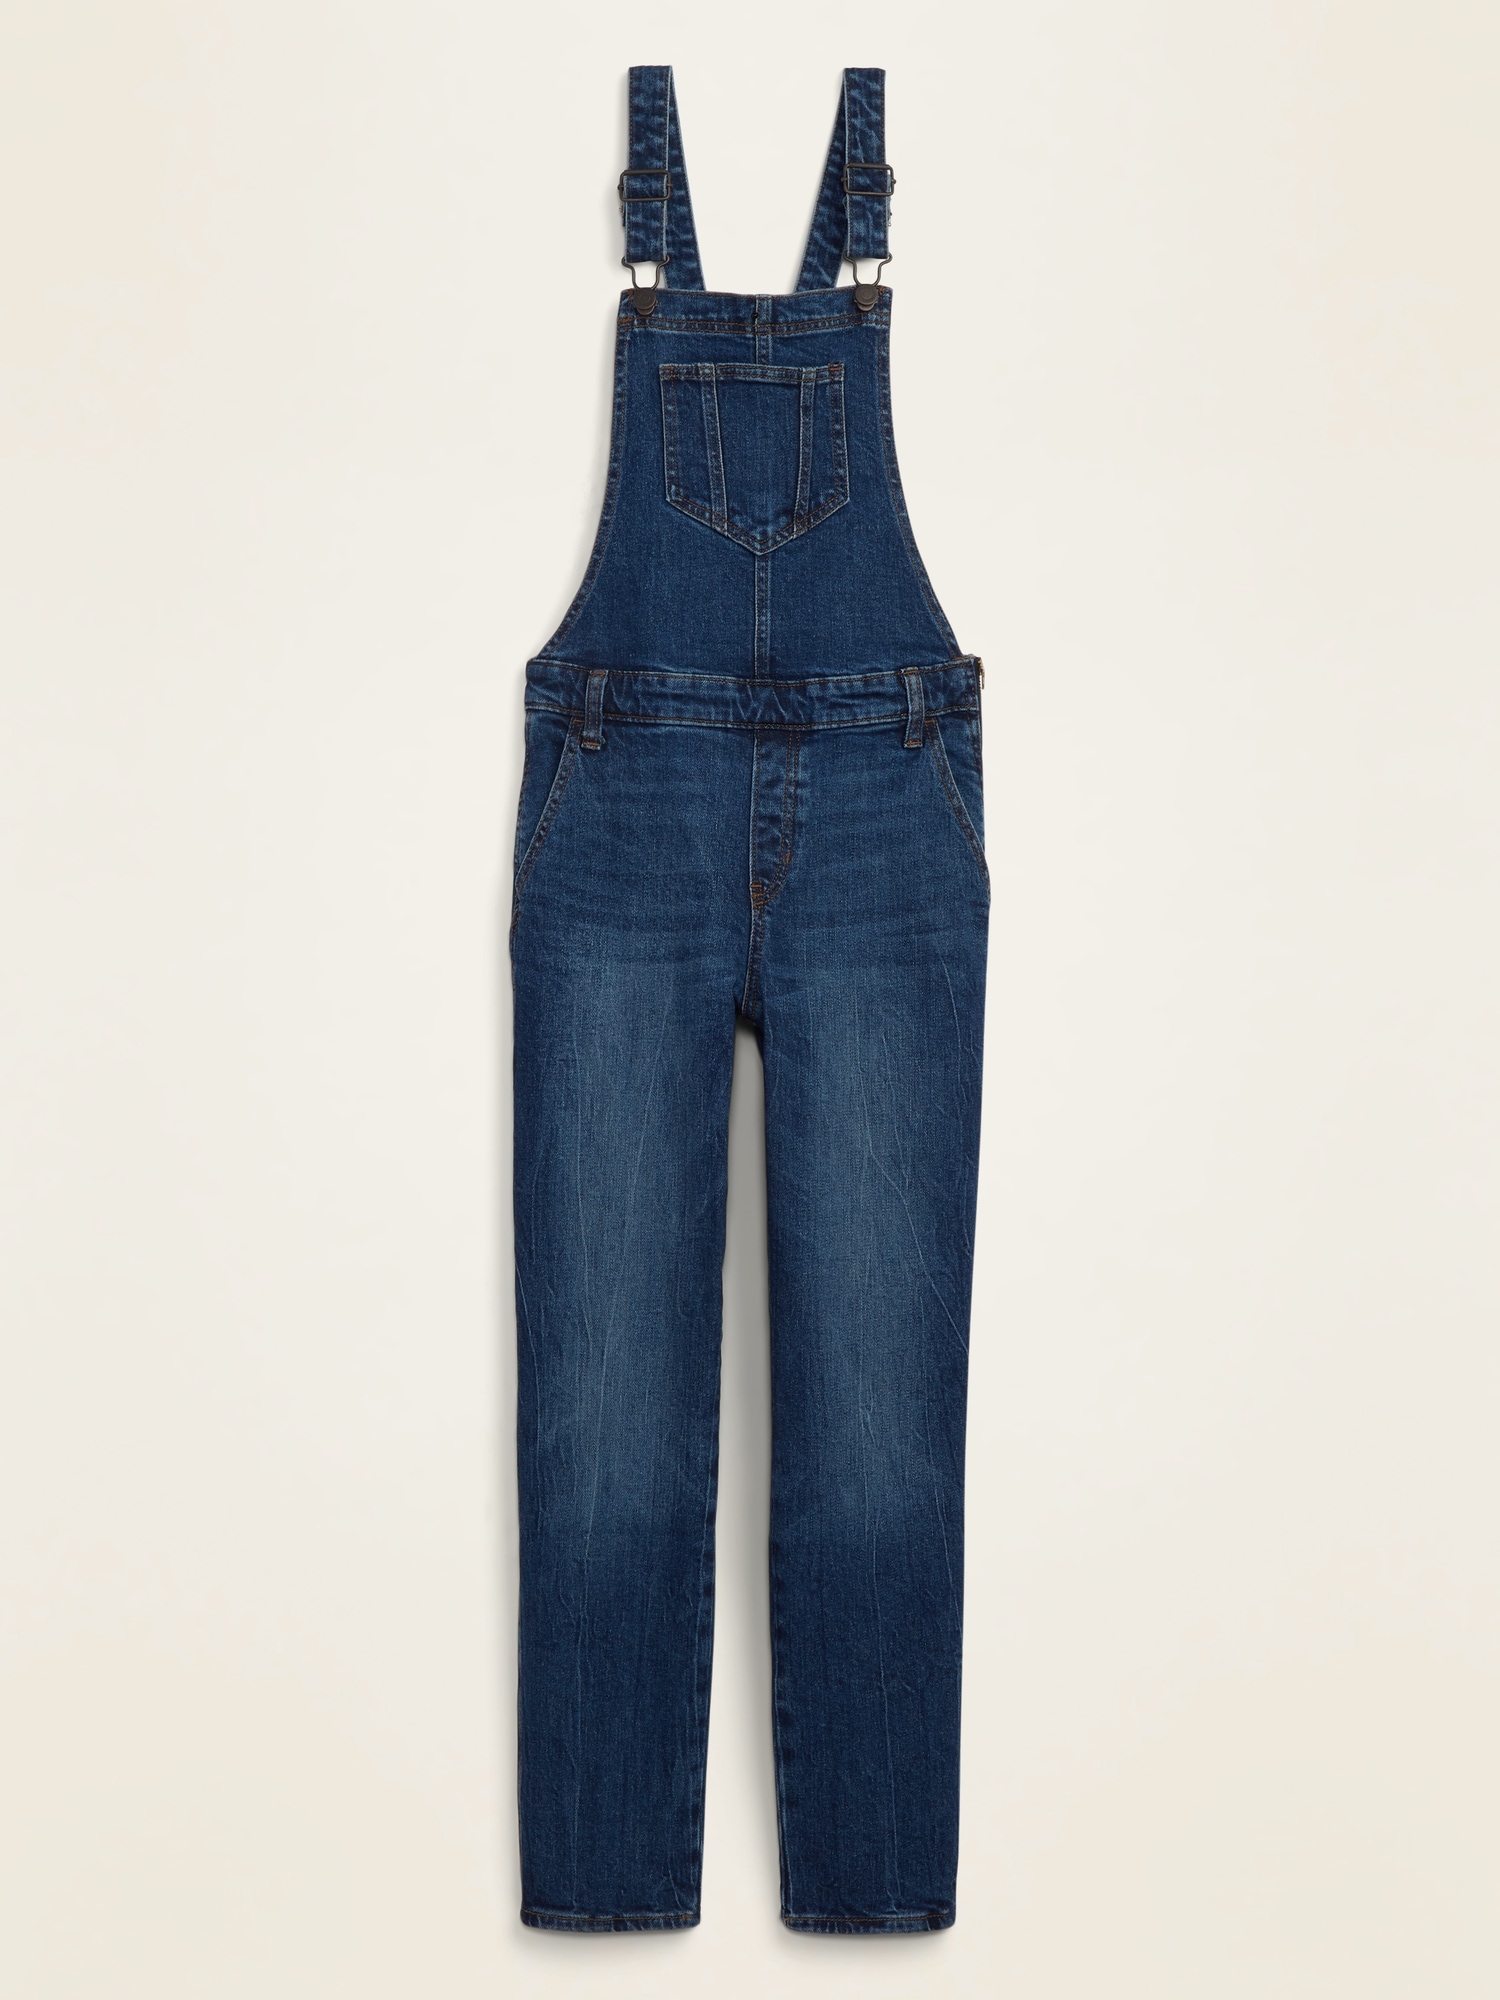 womens blue jean overalls